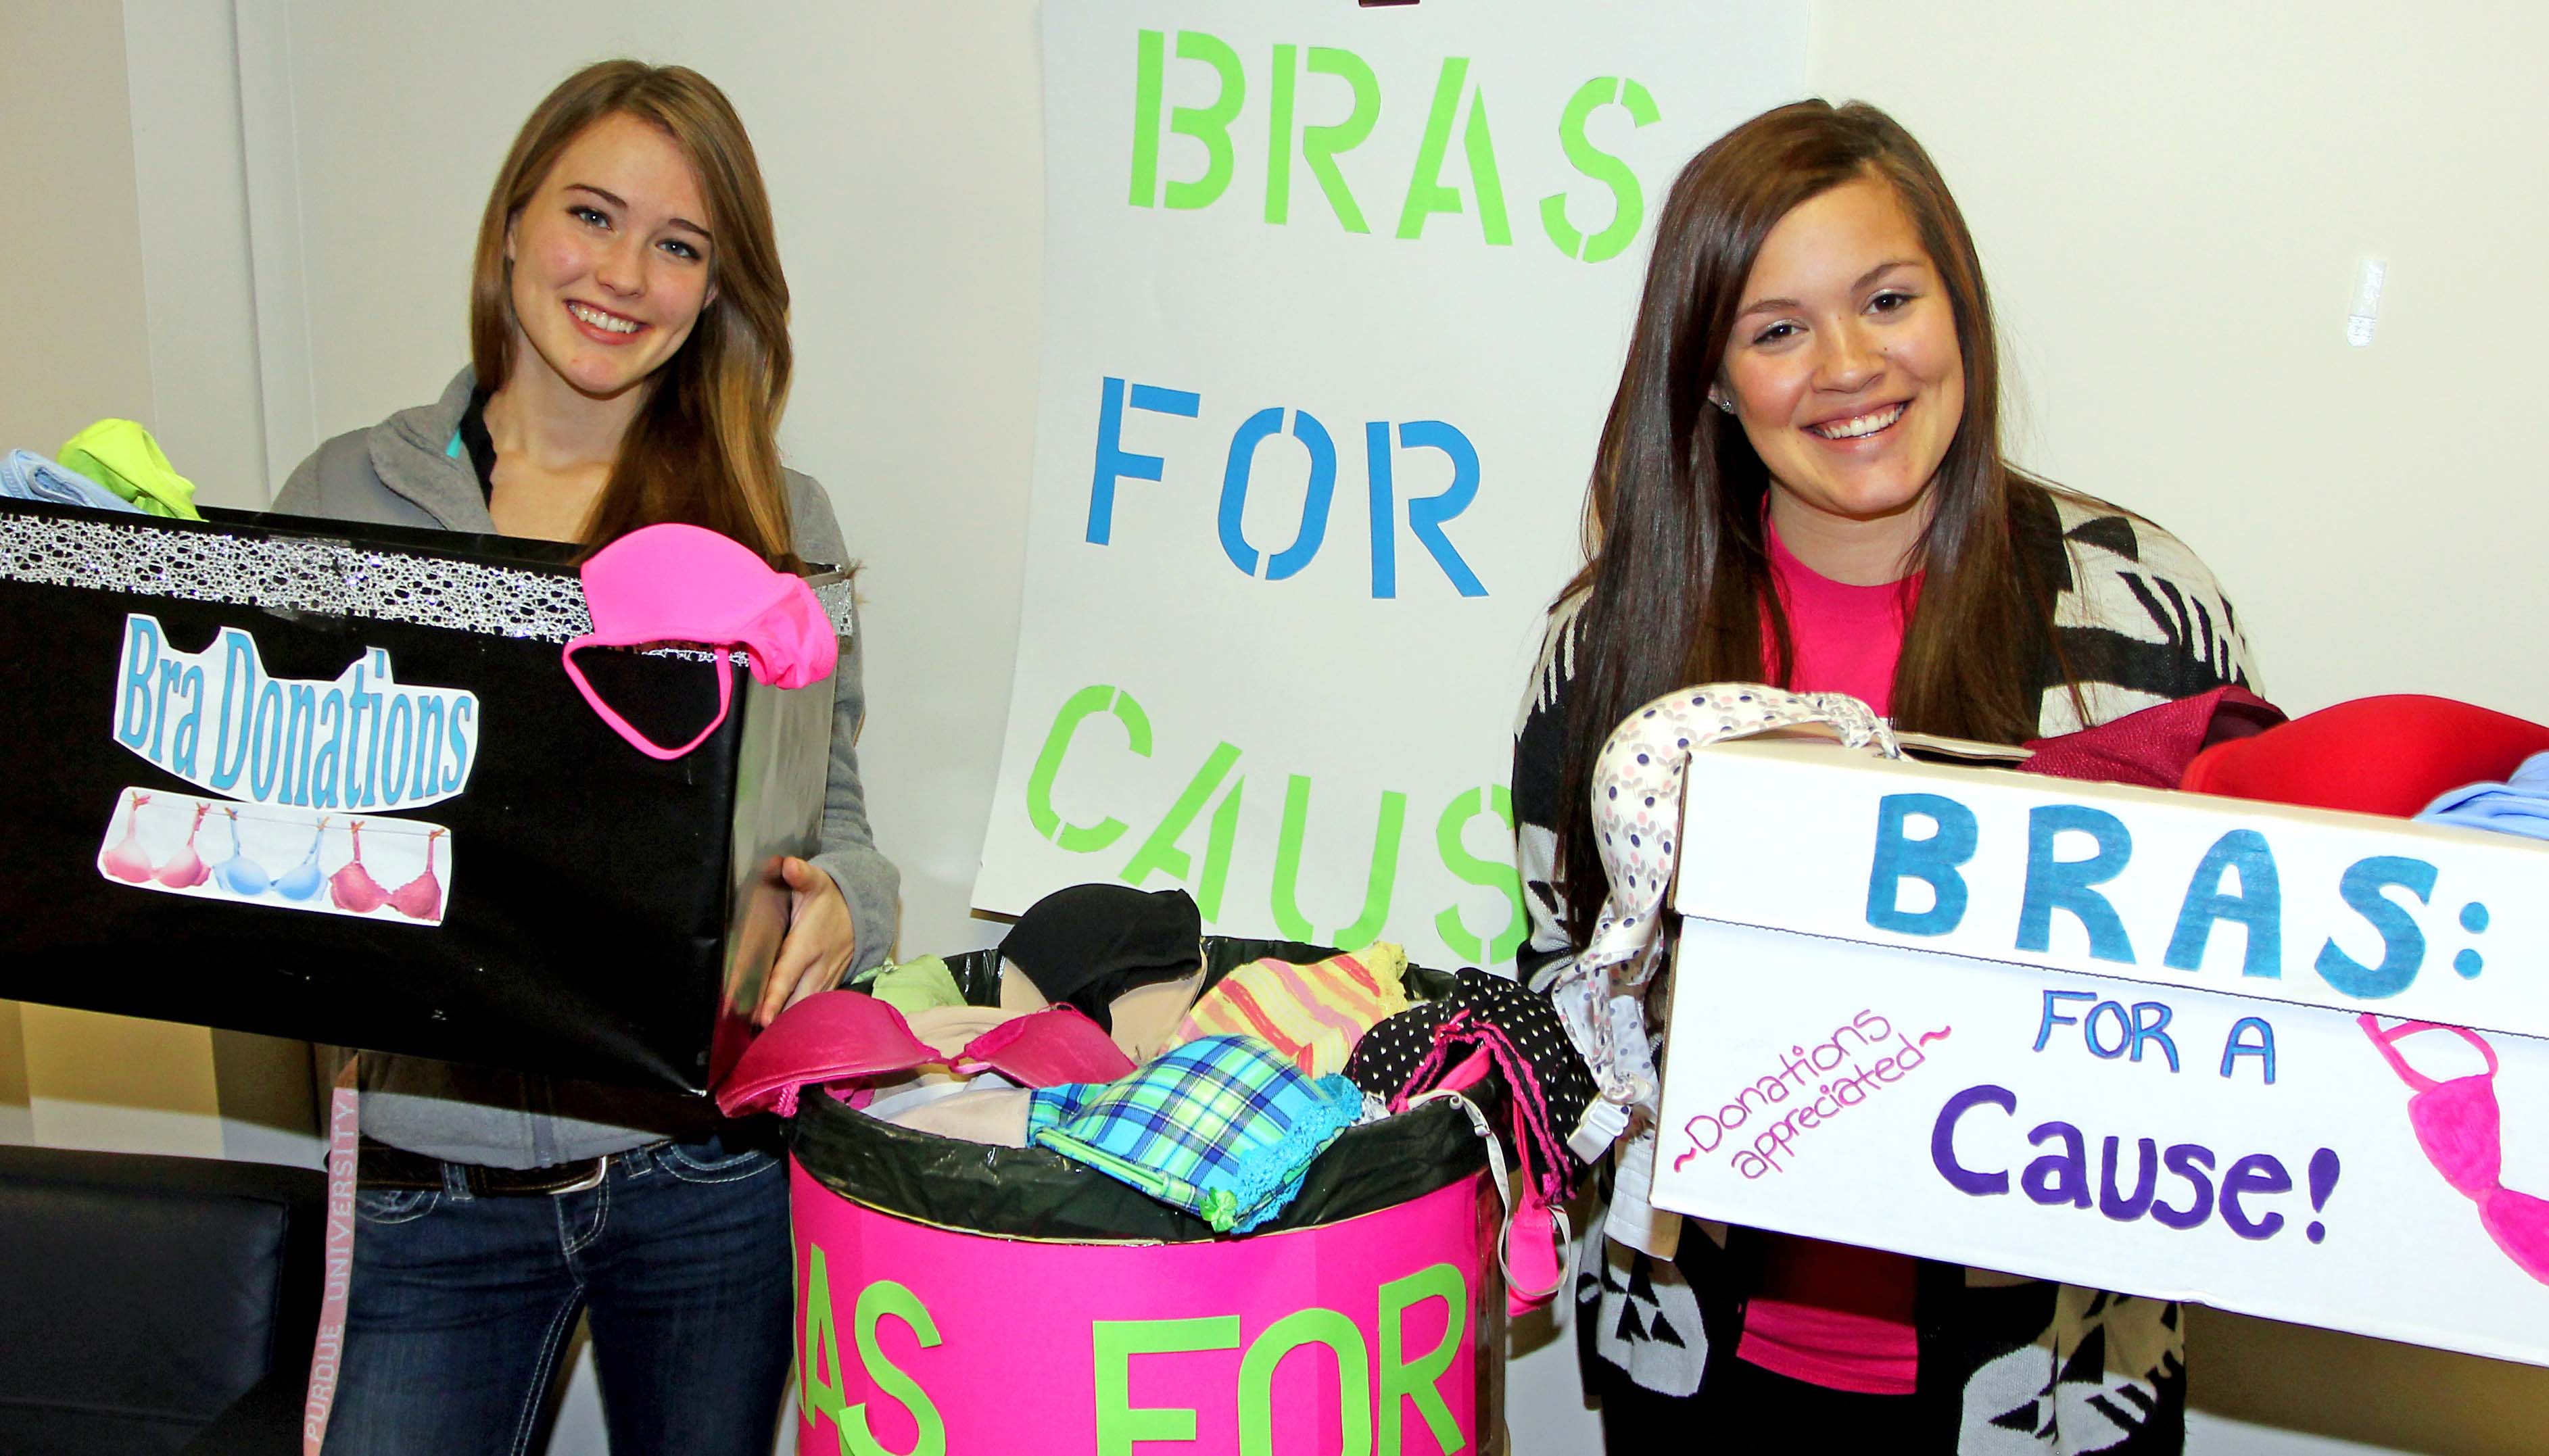 Bras For A Cause Draws Attention To Sex Trafficking Unk News 0480